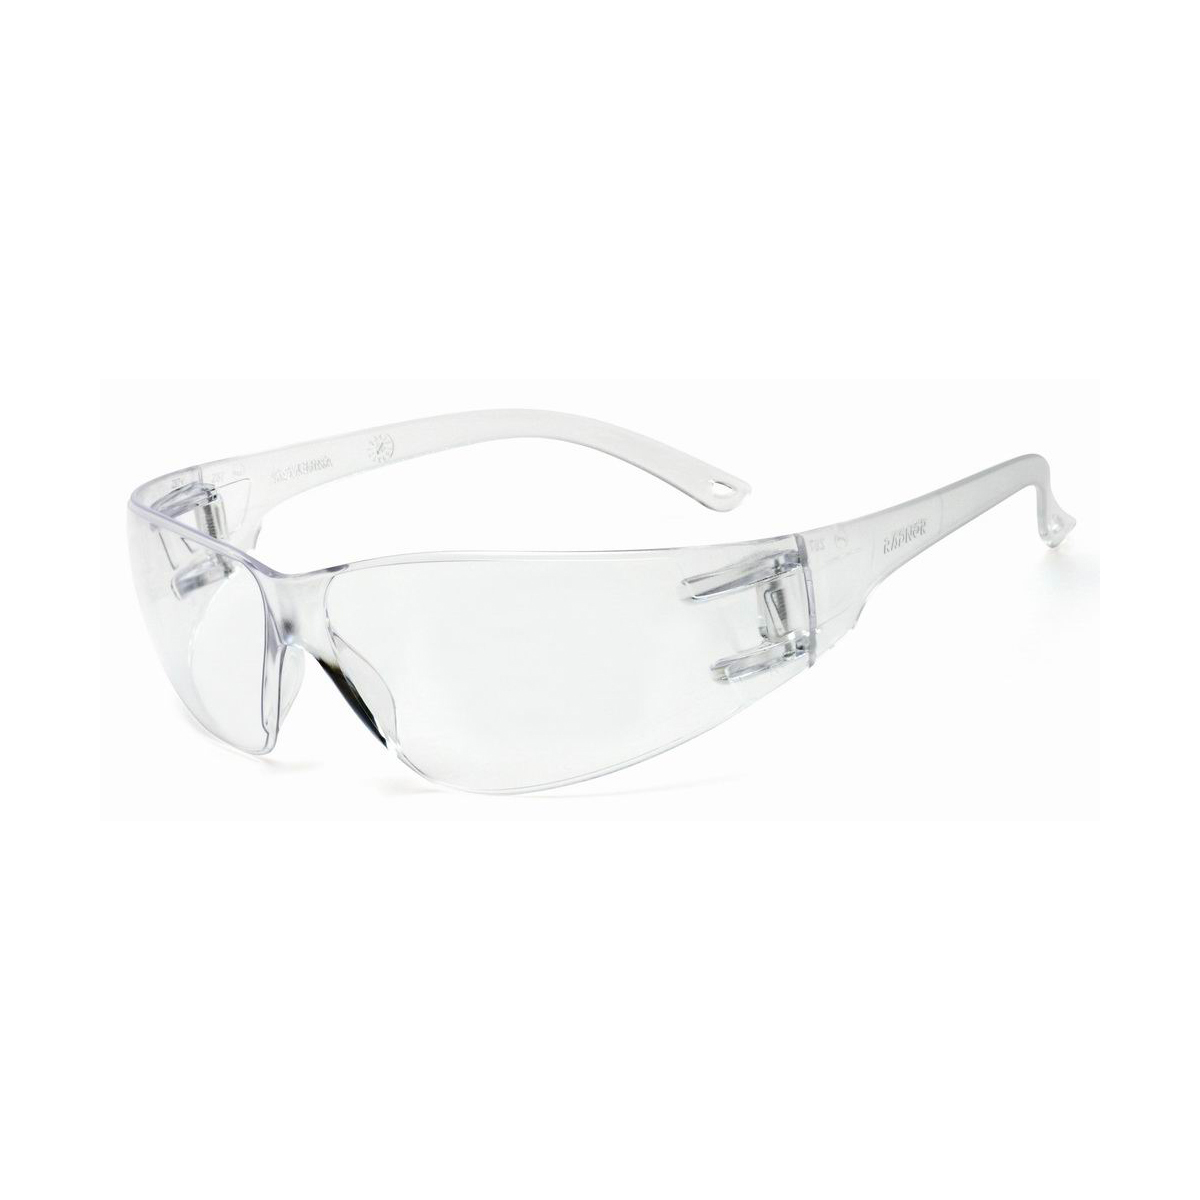 New Blue Moon Black Frame with Anti-Fog  Clear Lens Safety Glasses 